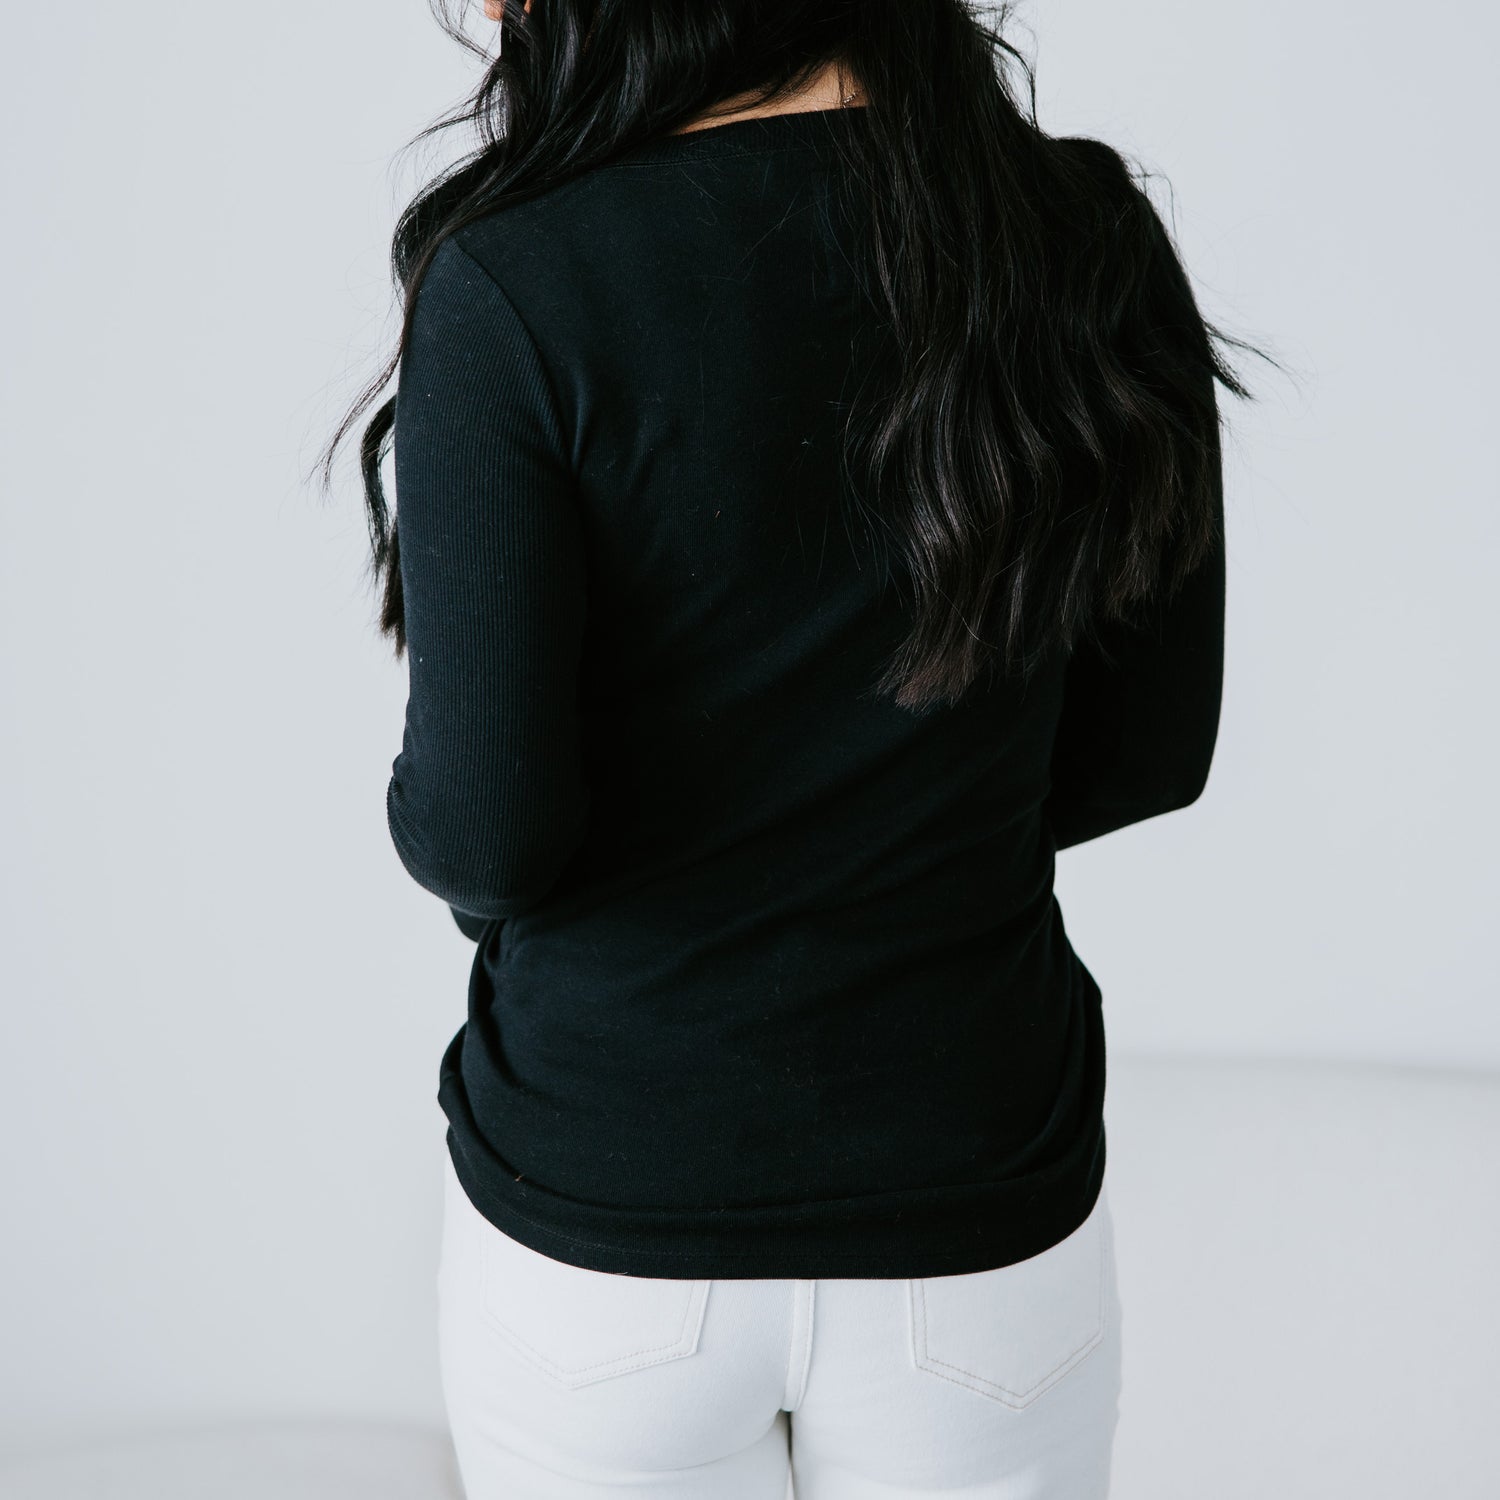 Kyra Long Sleeve Top by Lily & Lottie